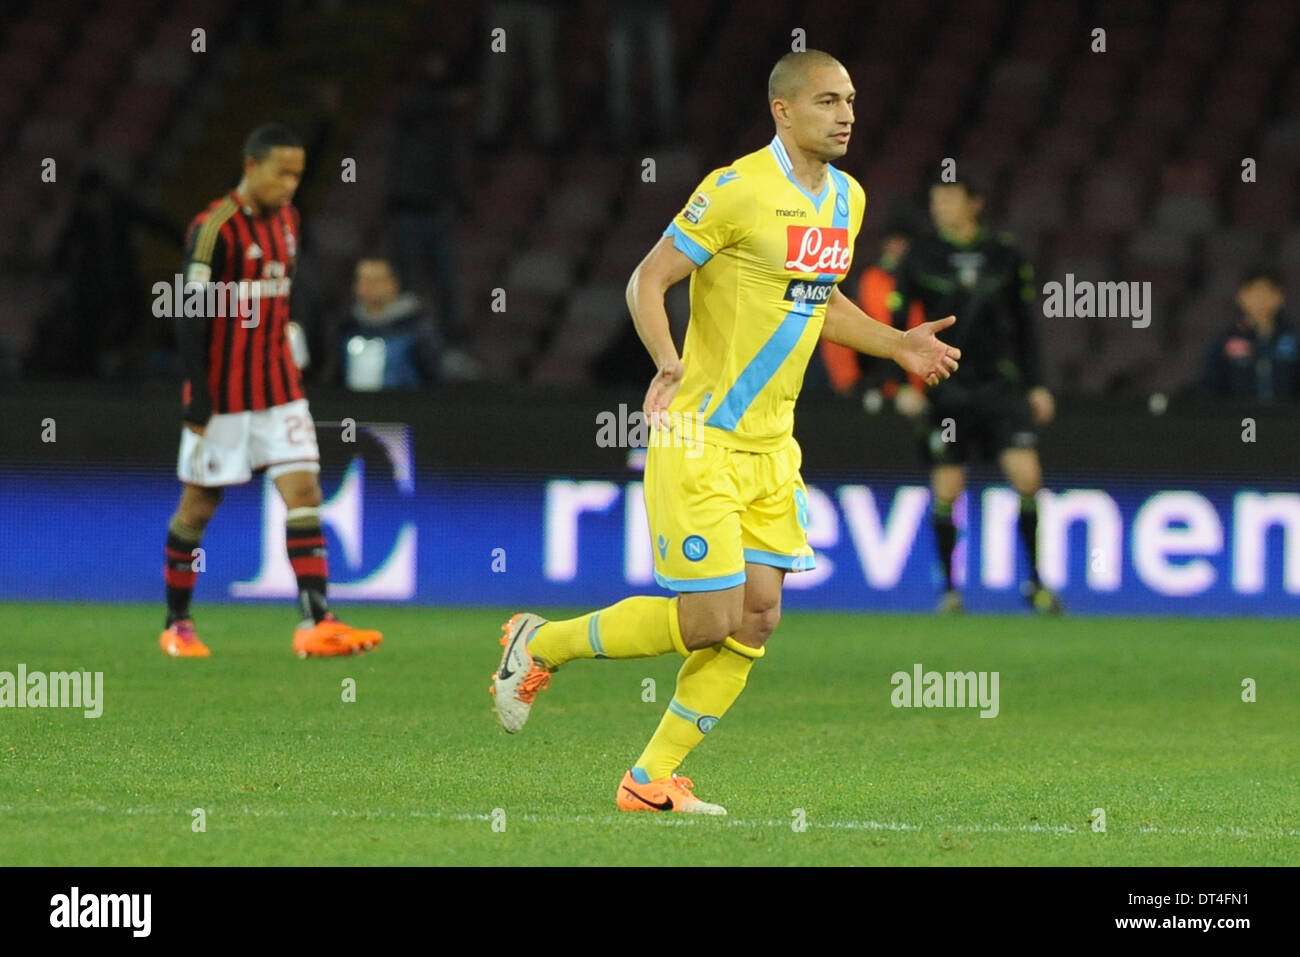 Naples, Italy. 8th Feb, 2014. Gokhan Inler of SSC Napoli celebrates after scoring Football / Soccer : Italian Seria A match between SSC Napoli and AC Milan at Stadio San Paolo in Naples, Italy. Credit:  Franco Romano/Alamy Live News Stock Photo